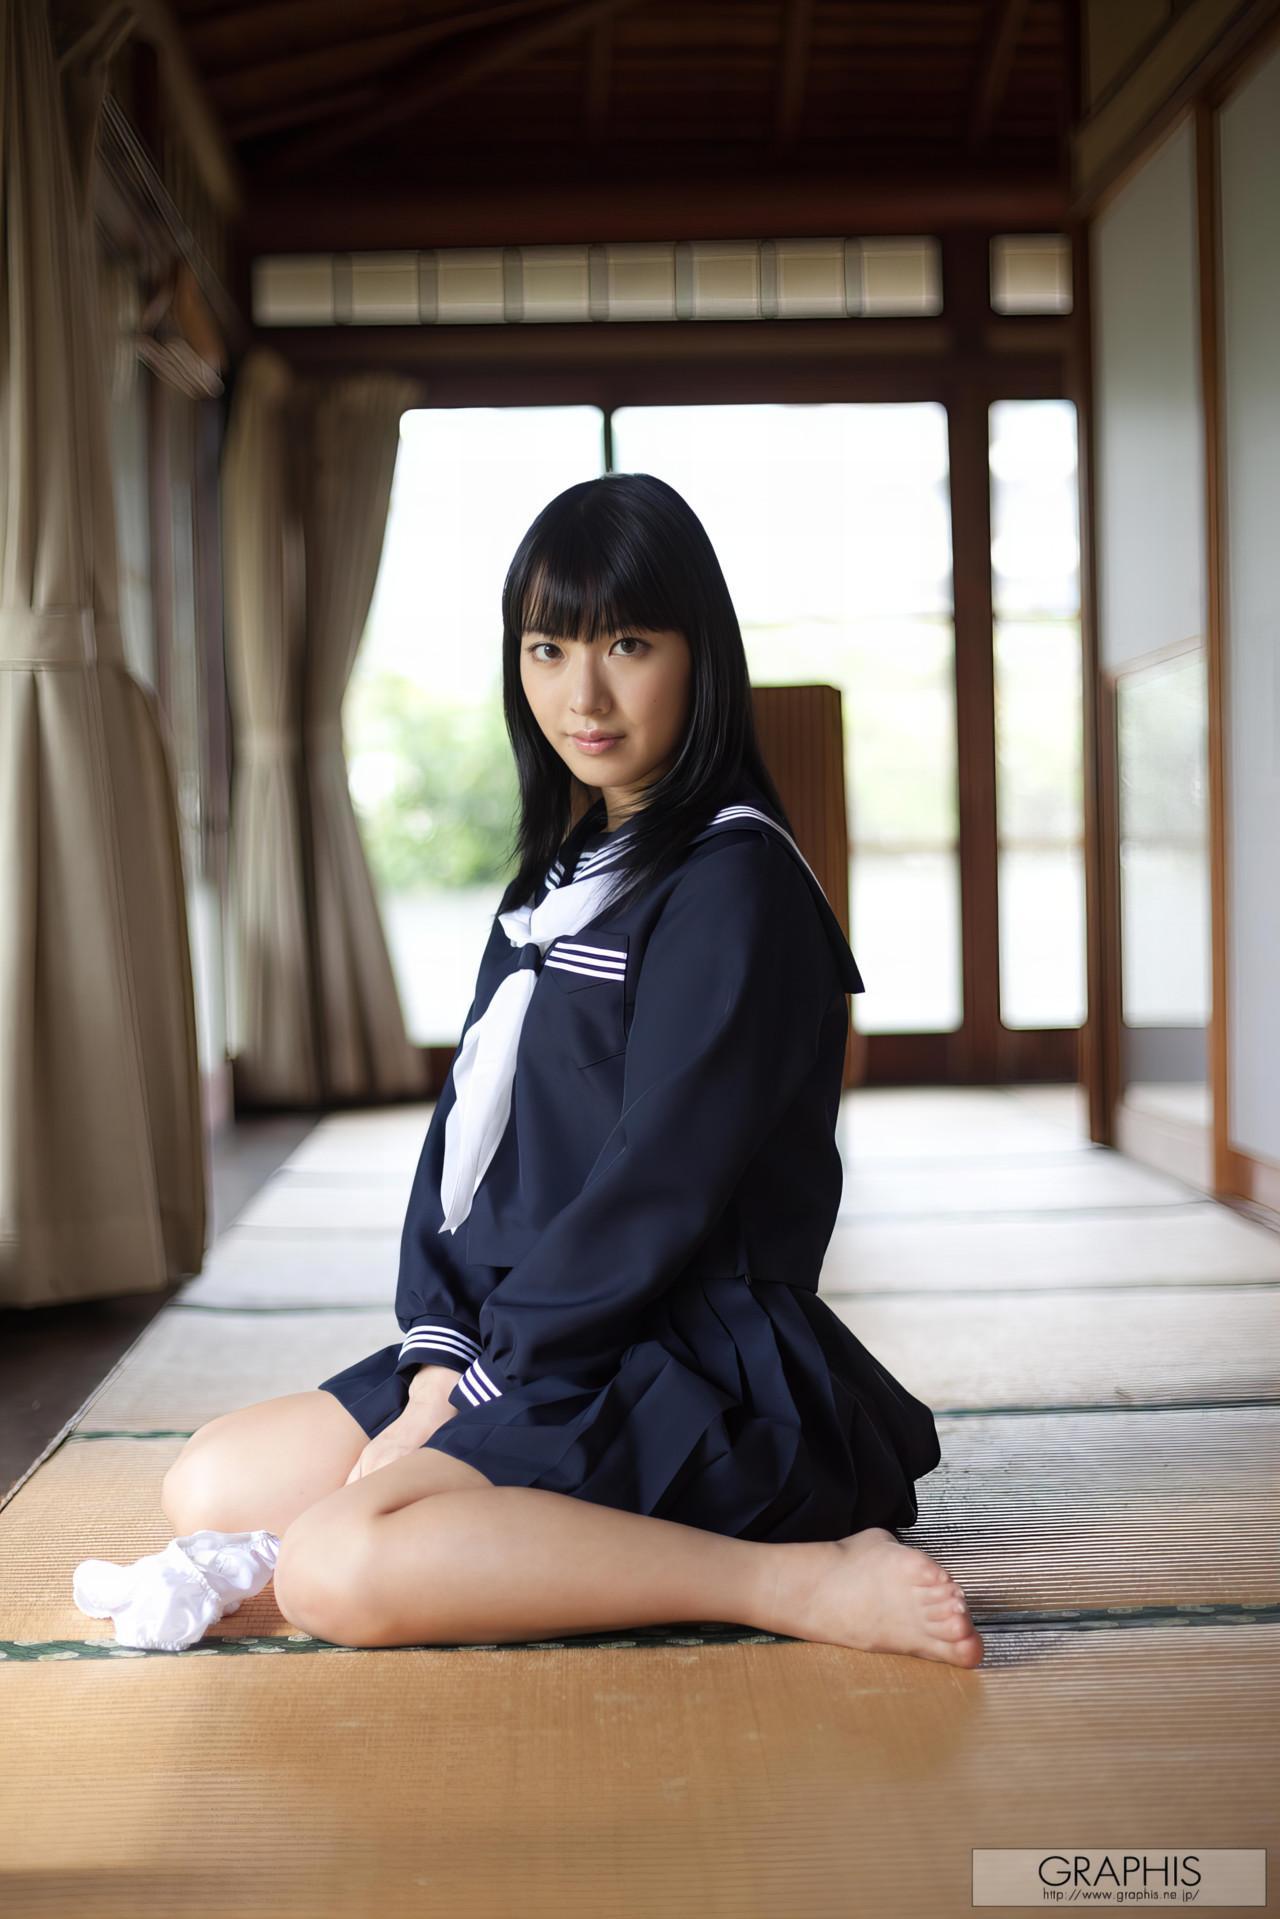 Kana Yume 由愛可奈, Graphis Special Contents [A to Z] Vol.02(27)